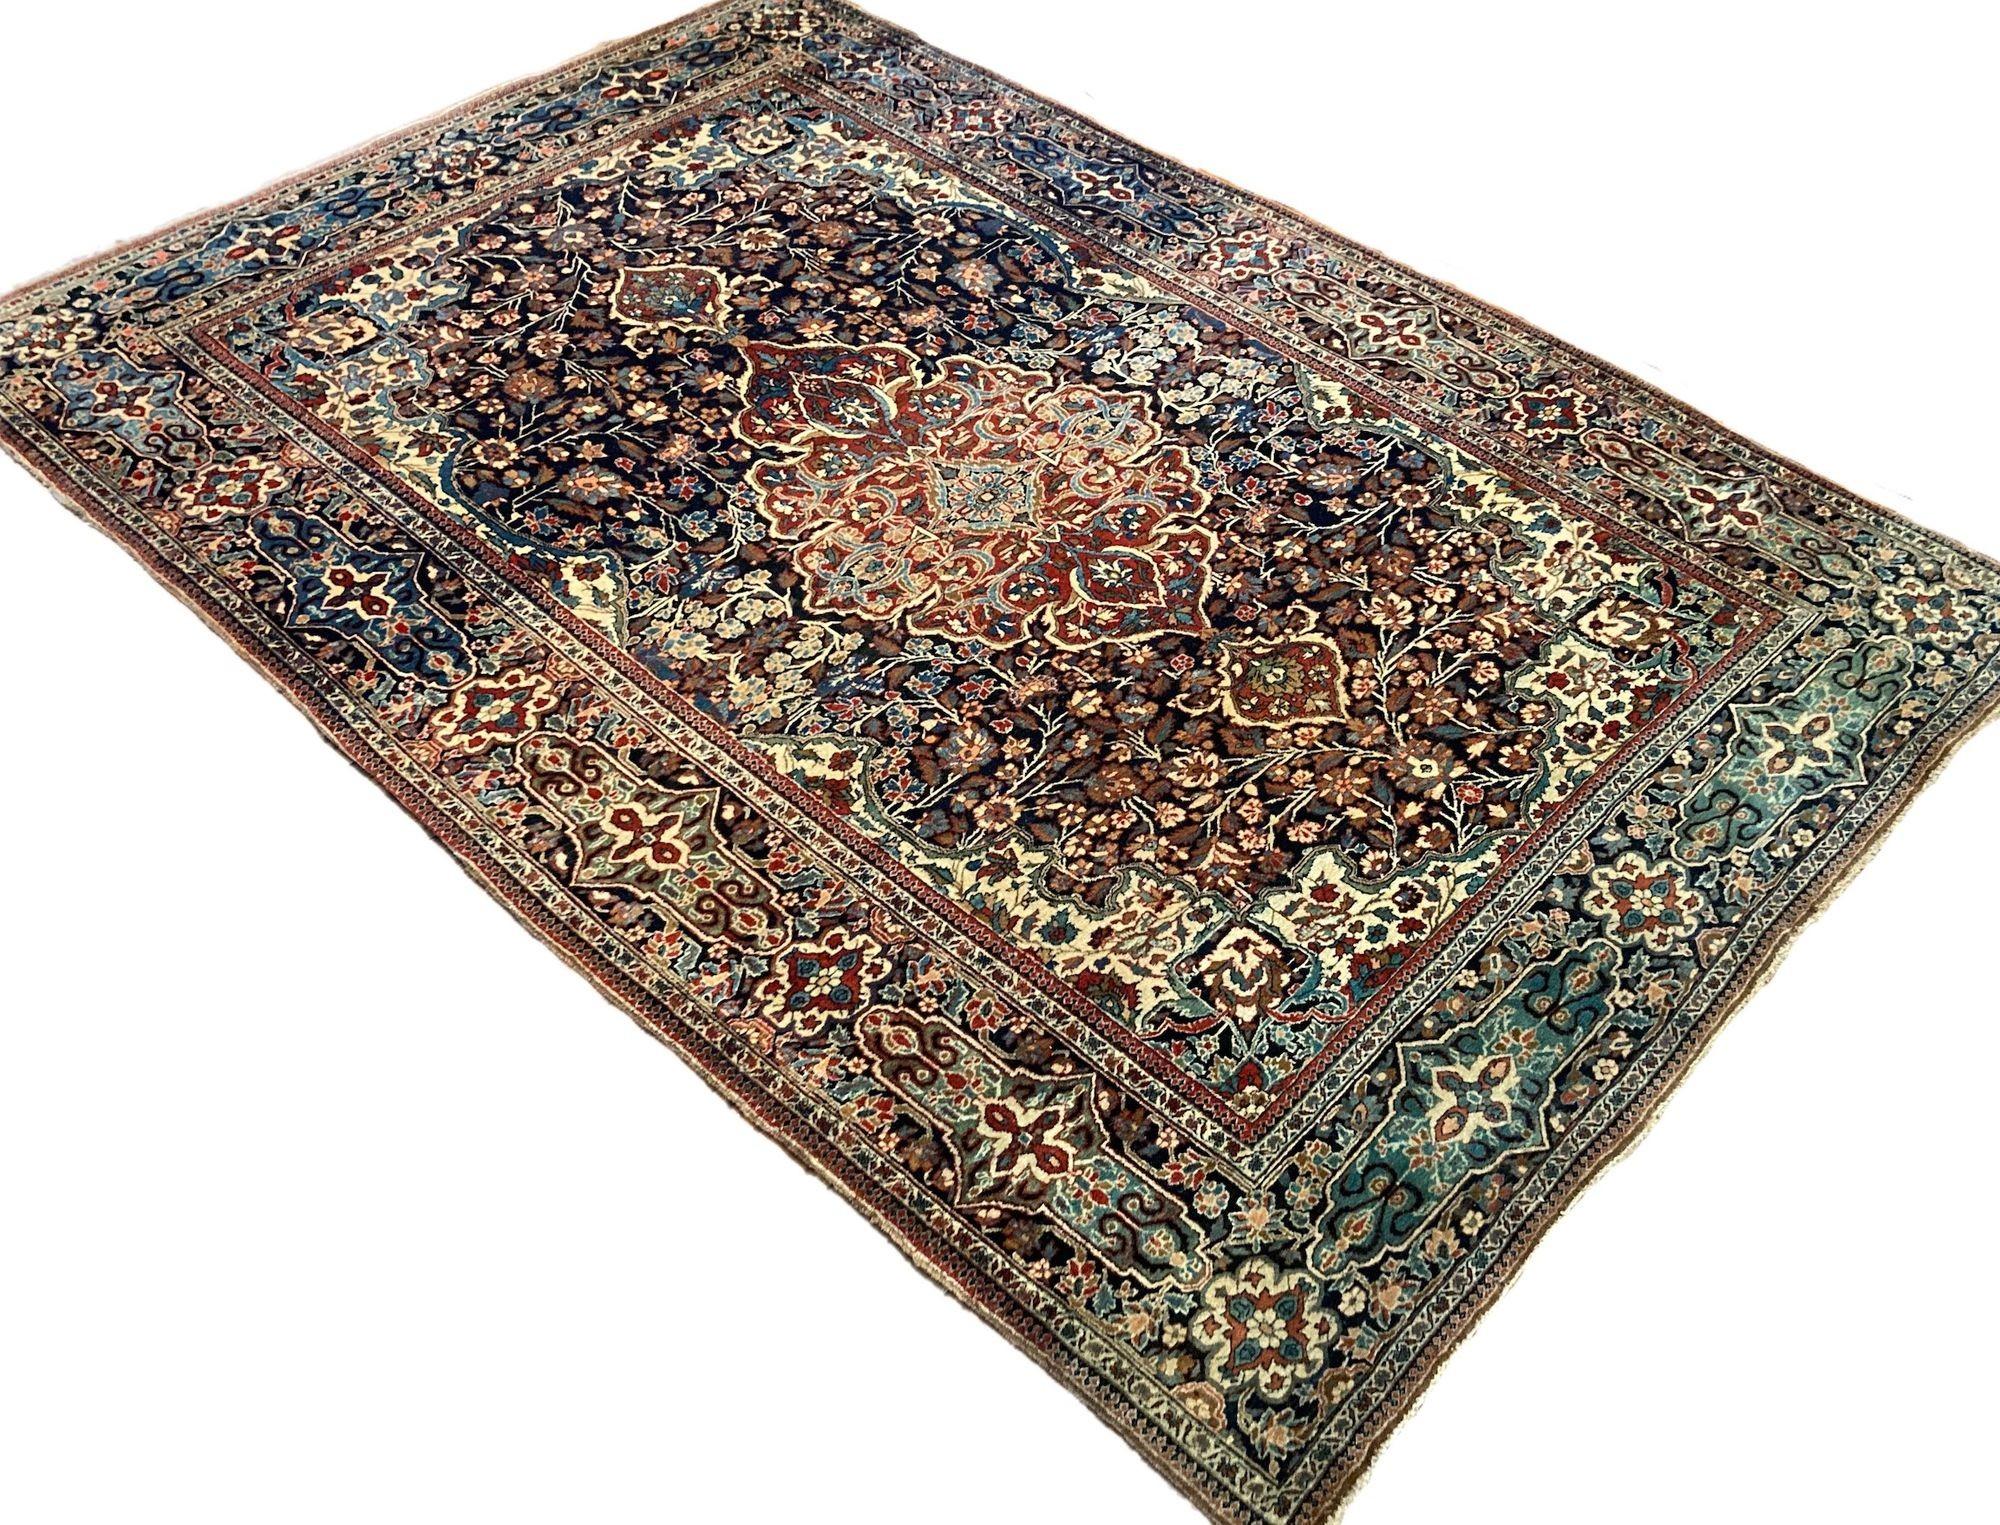 Antique Kashan Rug 2.10m x 1.41m In Good Condition For Sale In St. Albans, GB